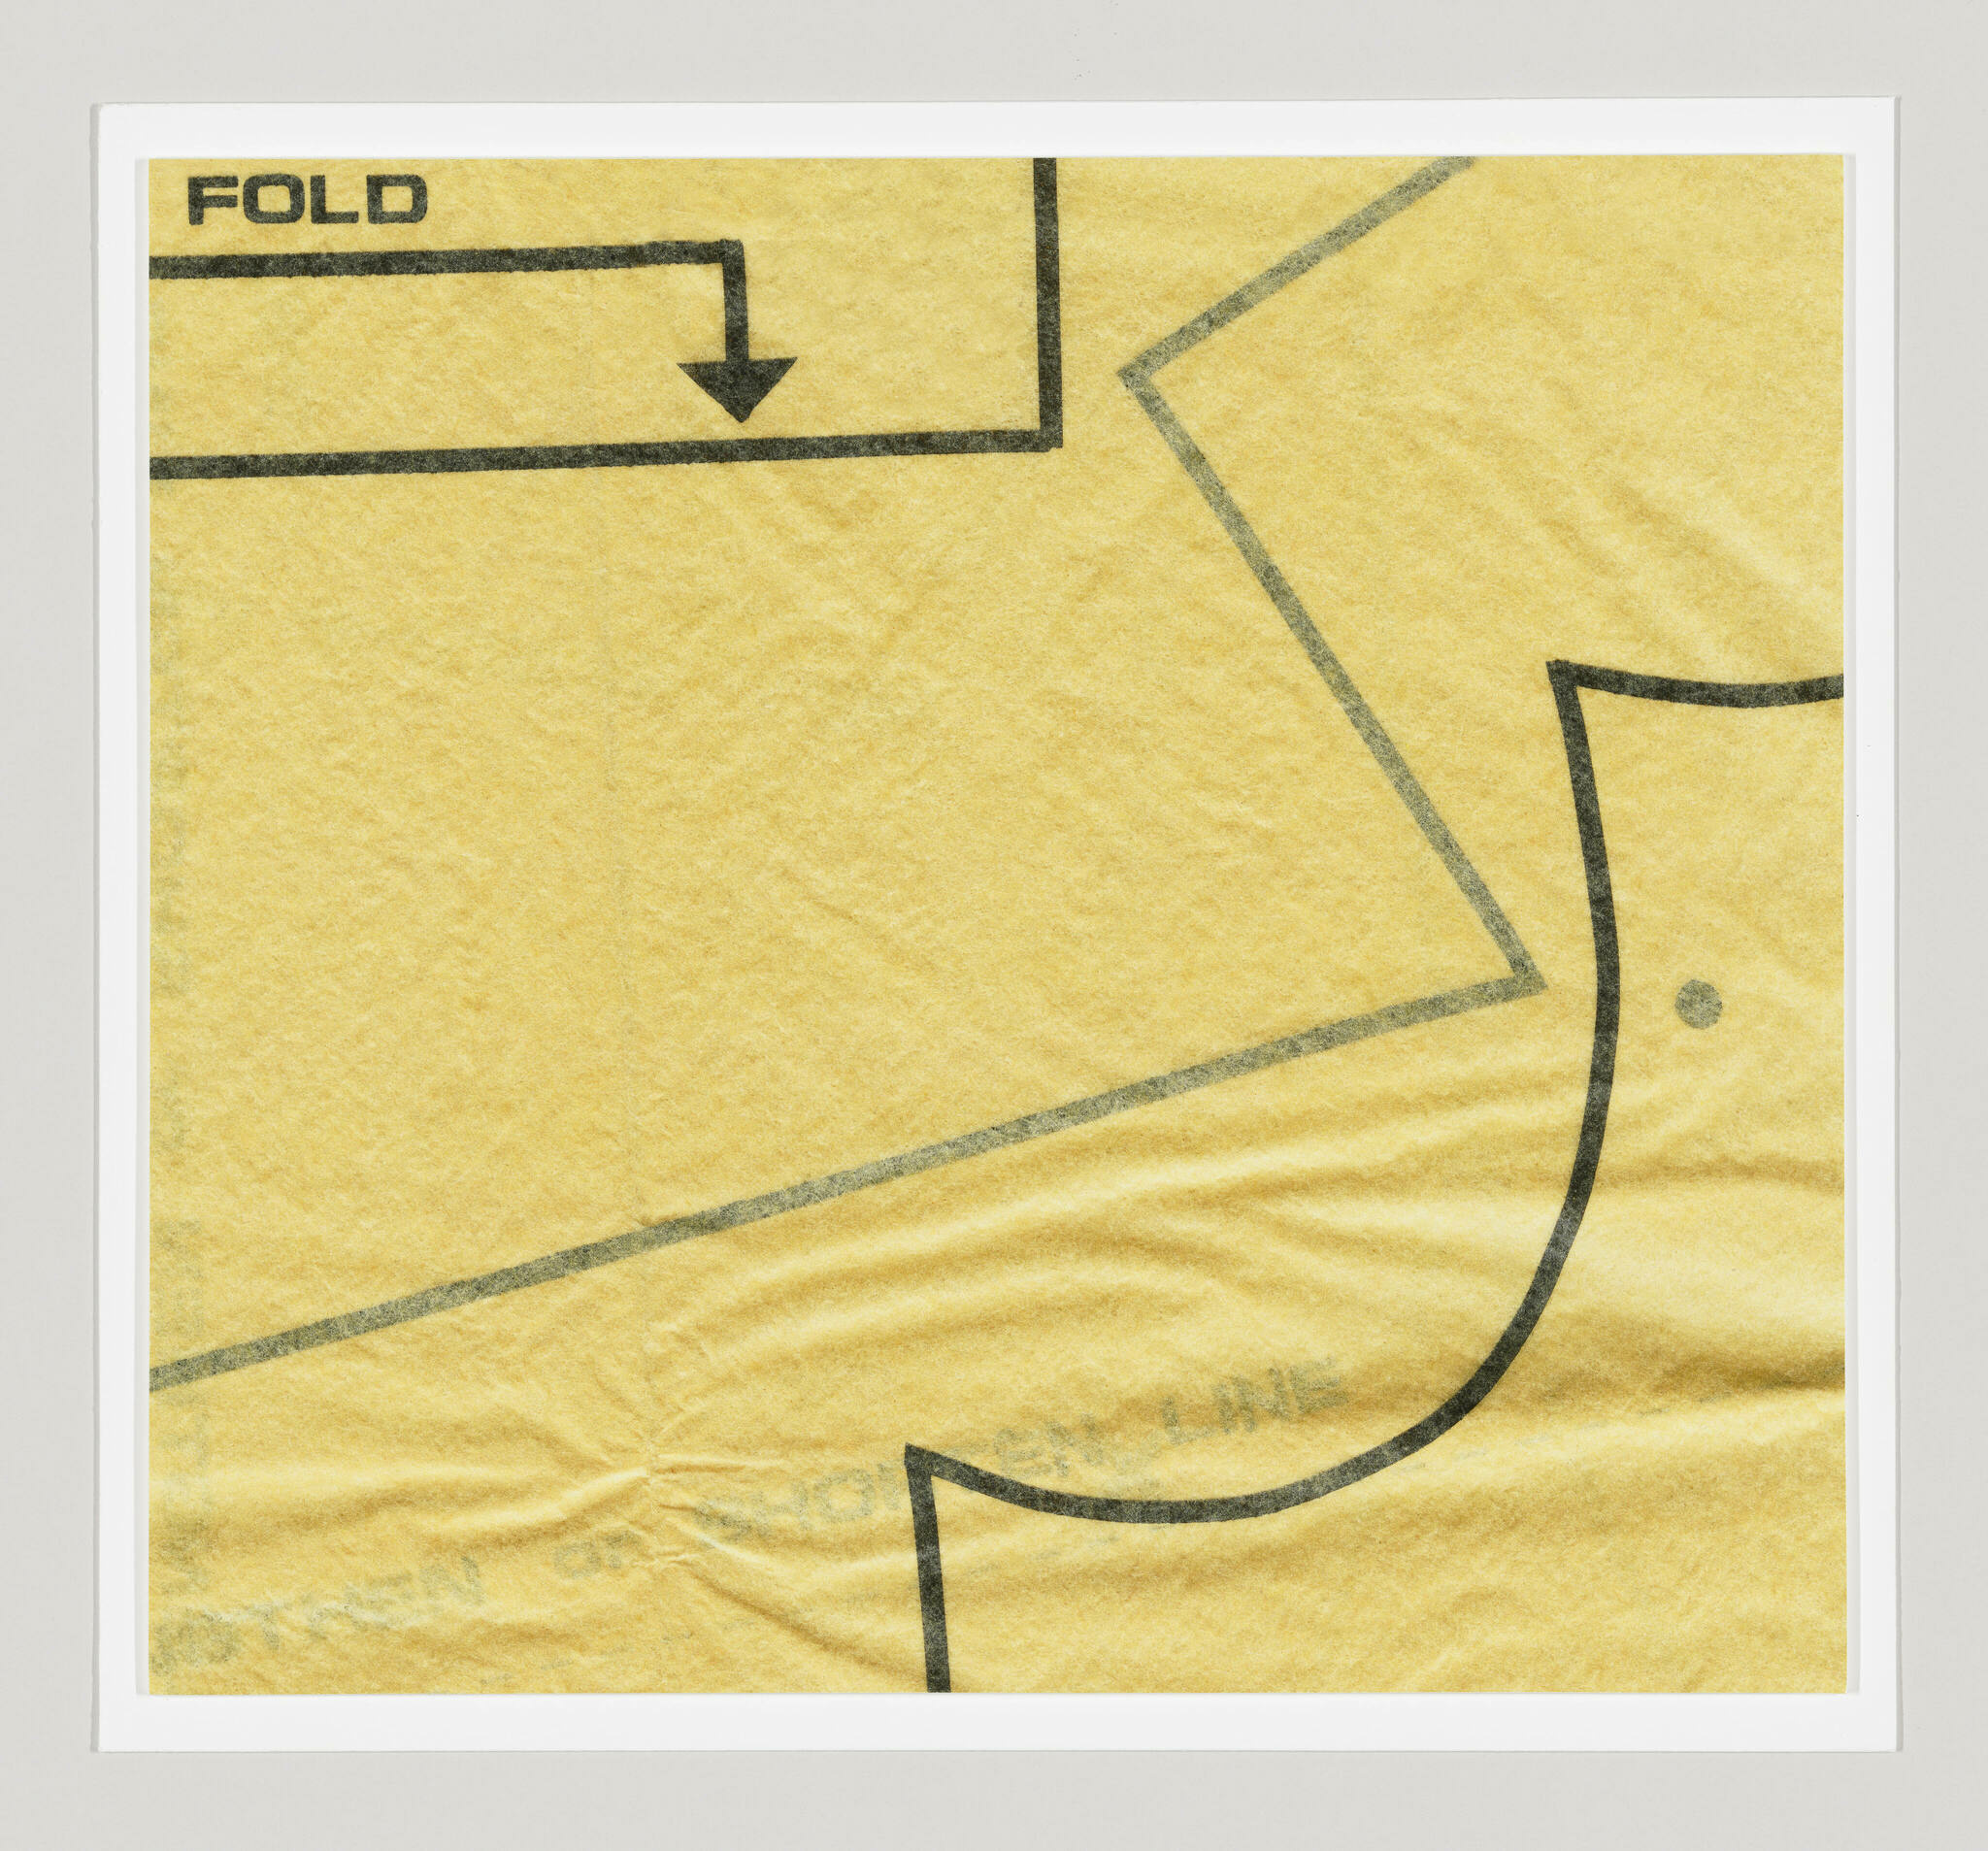 Detail of yellow tissue sewing pattern with printed curves, lines, and text reading FOLD with a directional arrow.